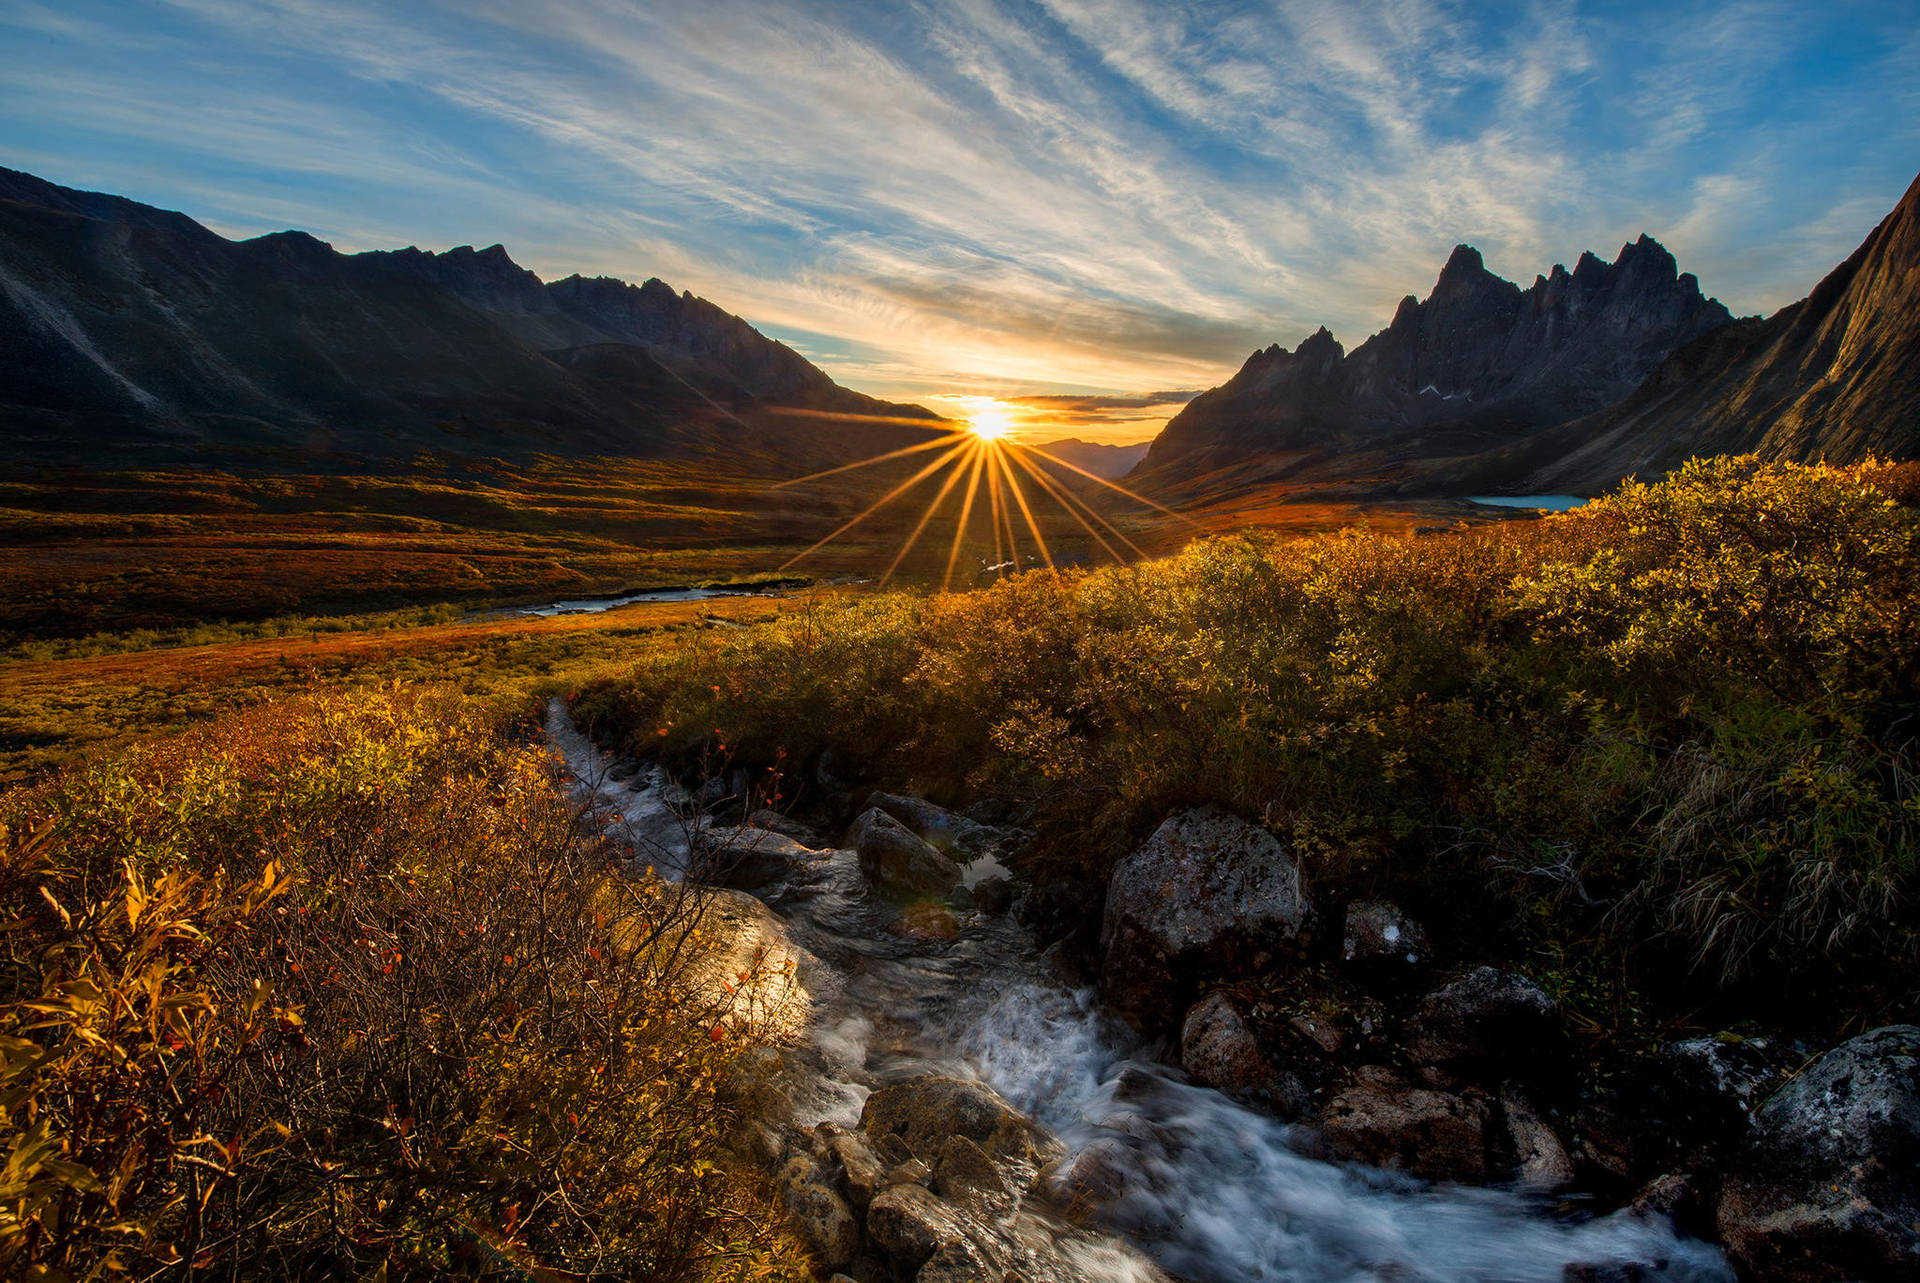 Hd Mountain Valley Ved Solnedgang Wallpaper